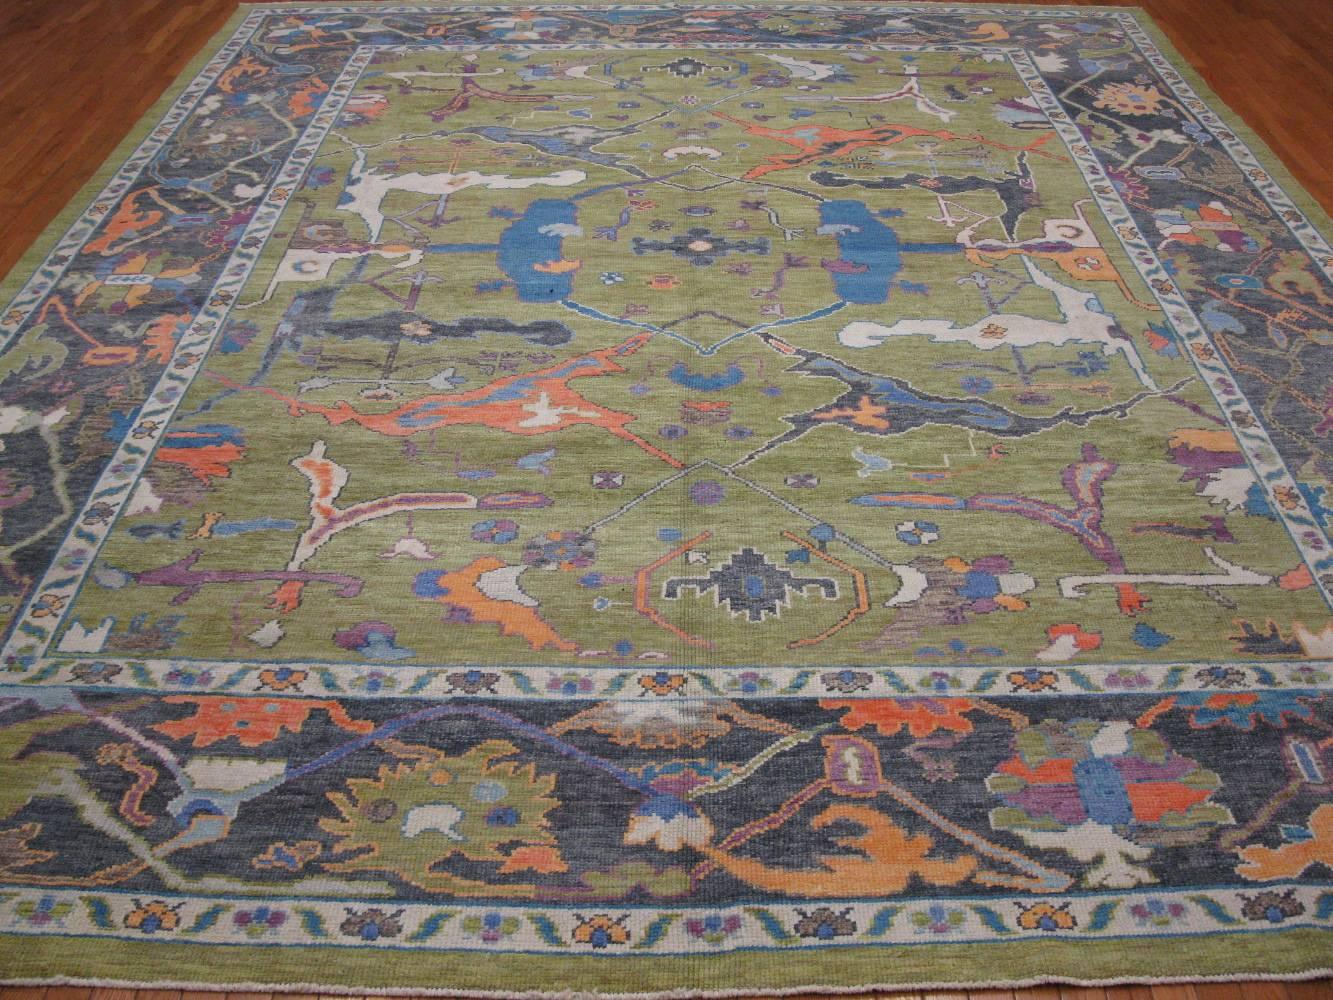 This is a new handmade Turkish Oushak rug with fresh and bright colors recapturing the look of the antique Oushak’s of the early 20th century.  It is made with all wool and natural dyes. It measures 10' 11'' x 13' 6''.